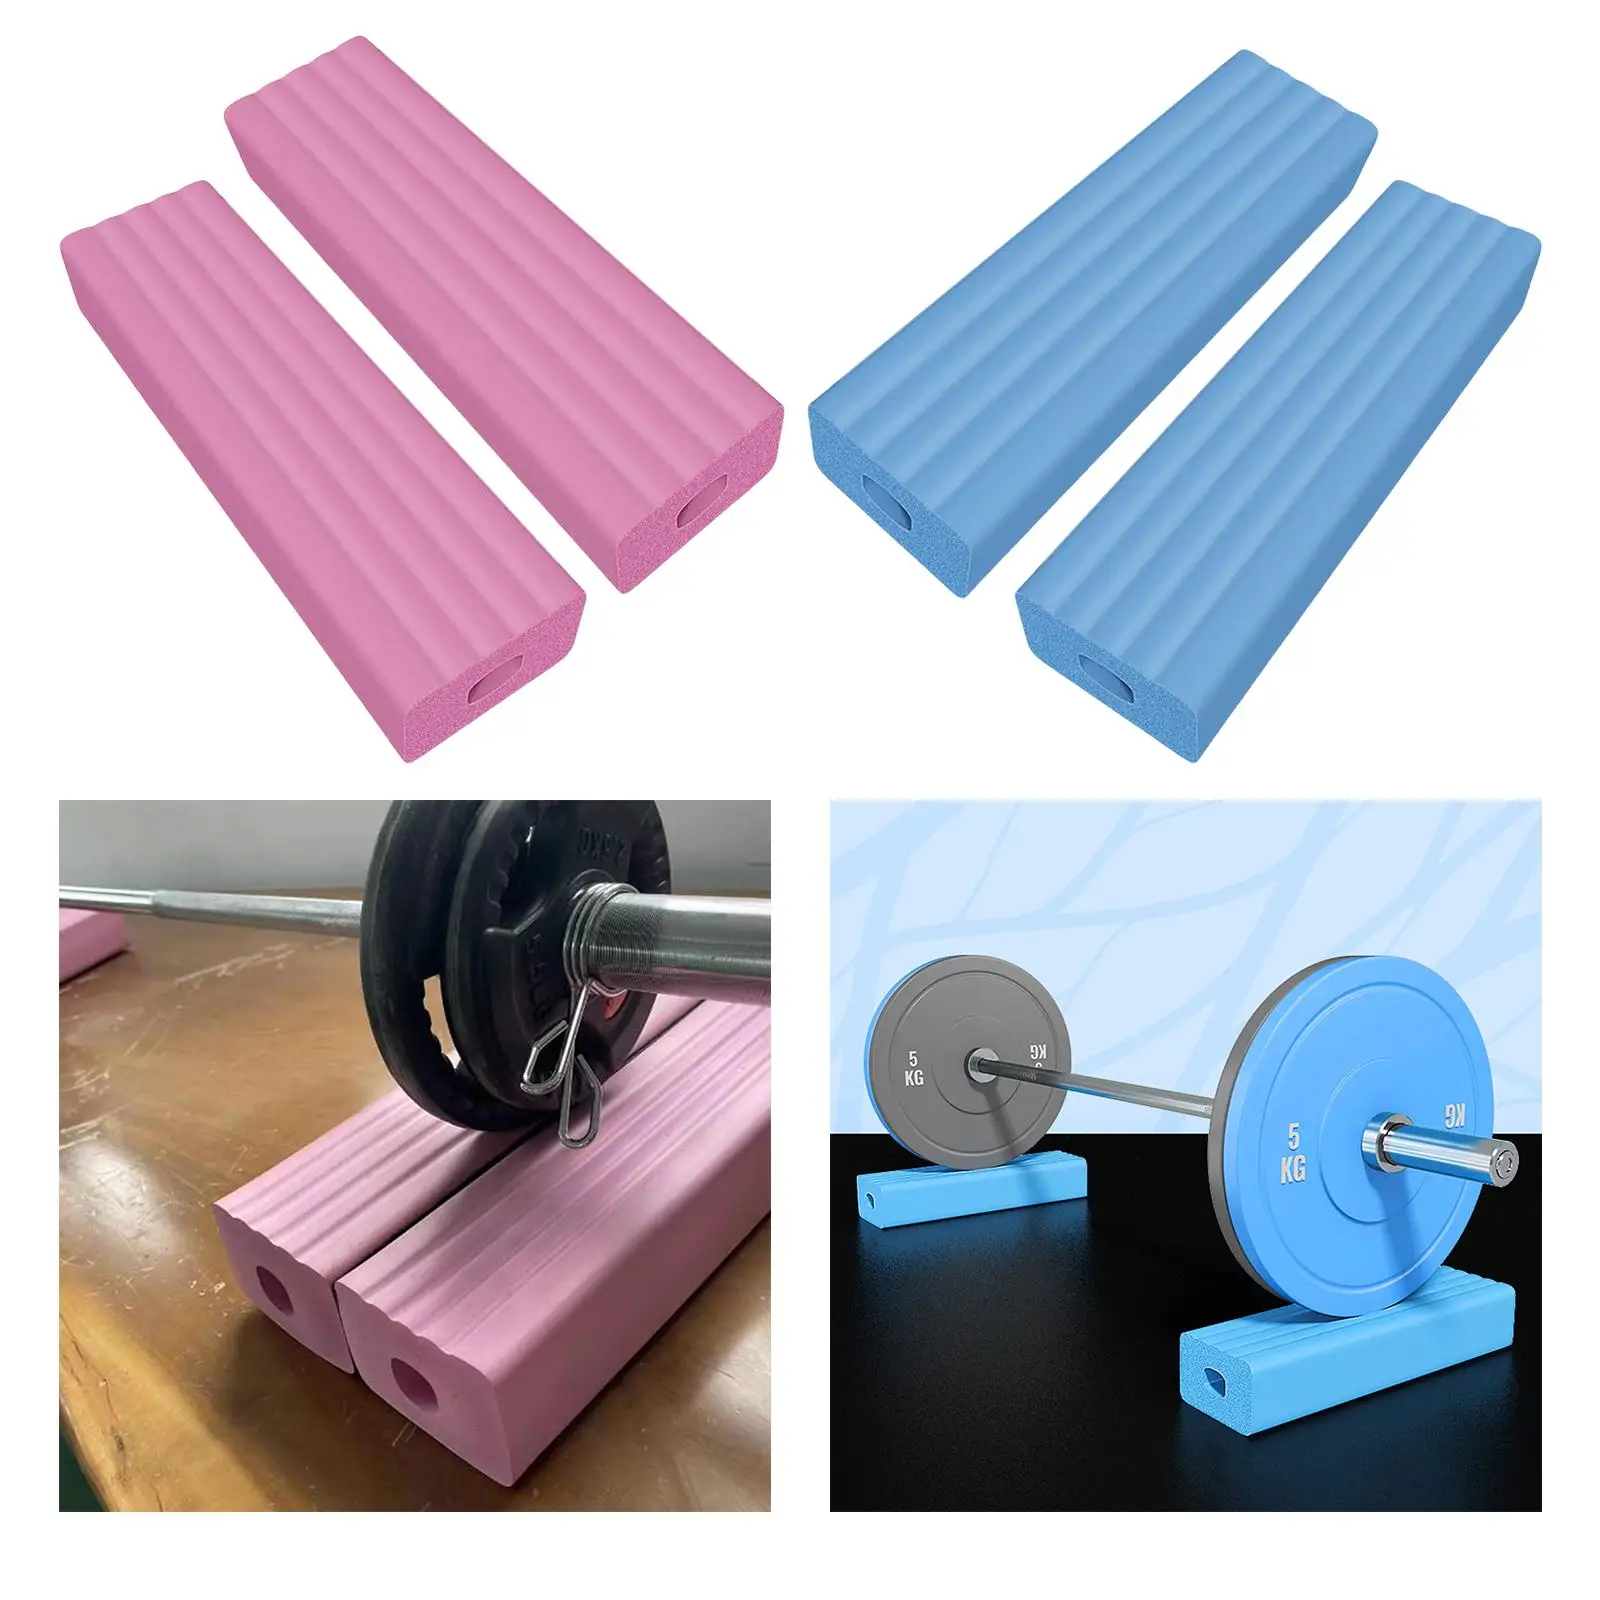 Foam Rubber Barbell Cushion Pads Holder Lightweight for Fitness Exercise ,Easy